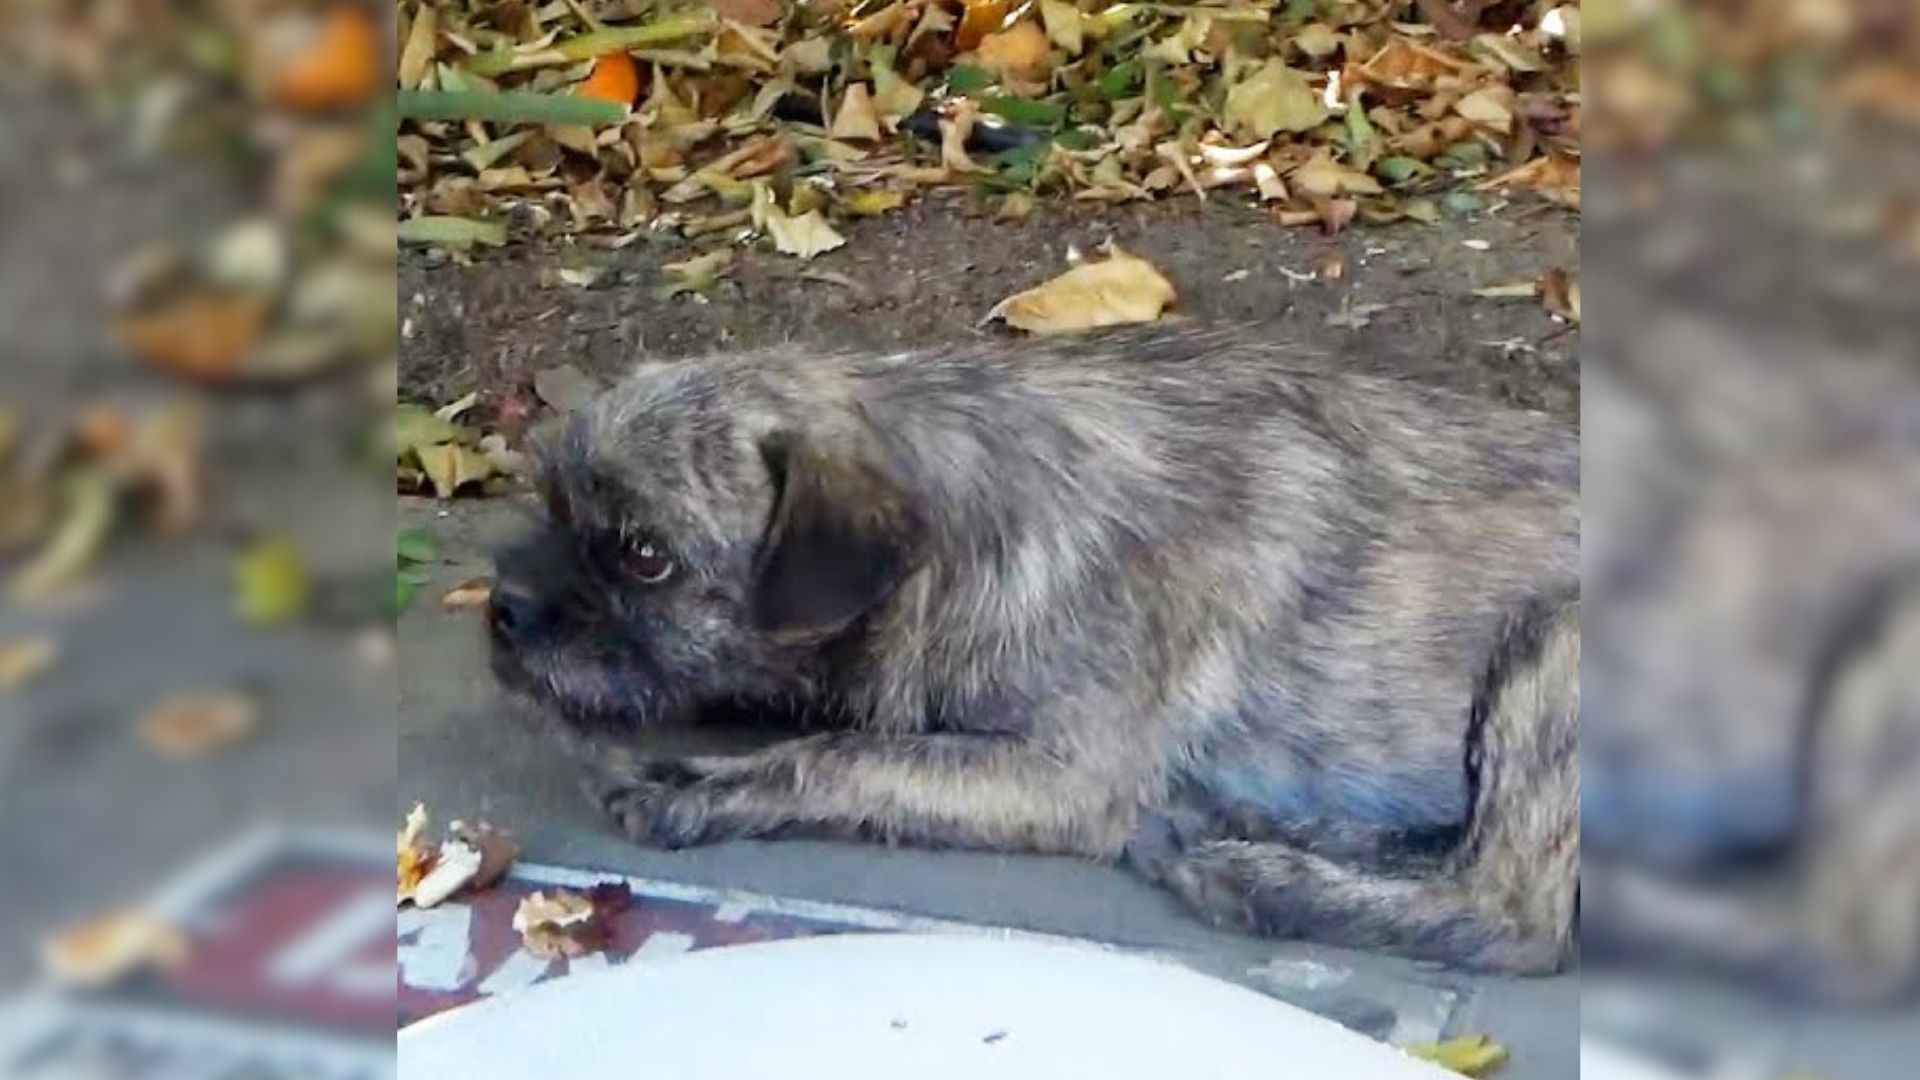 This Poor Dog Left On The Street Couldn’t Understand Why His Owner Abandoned Him